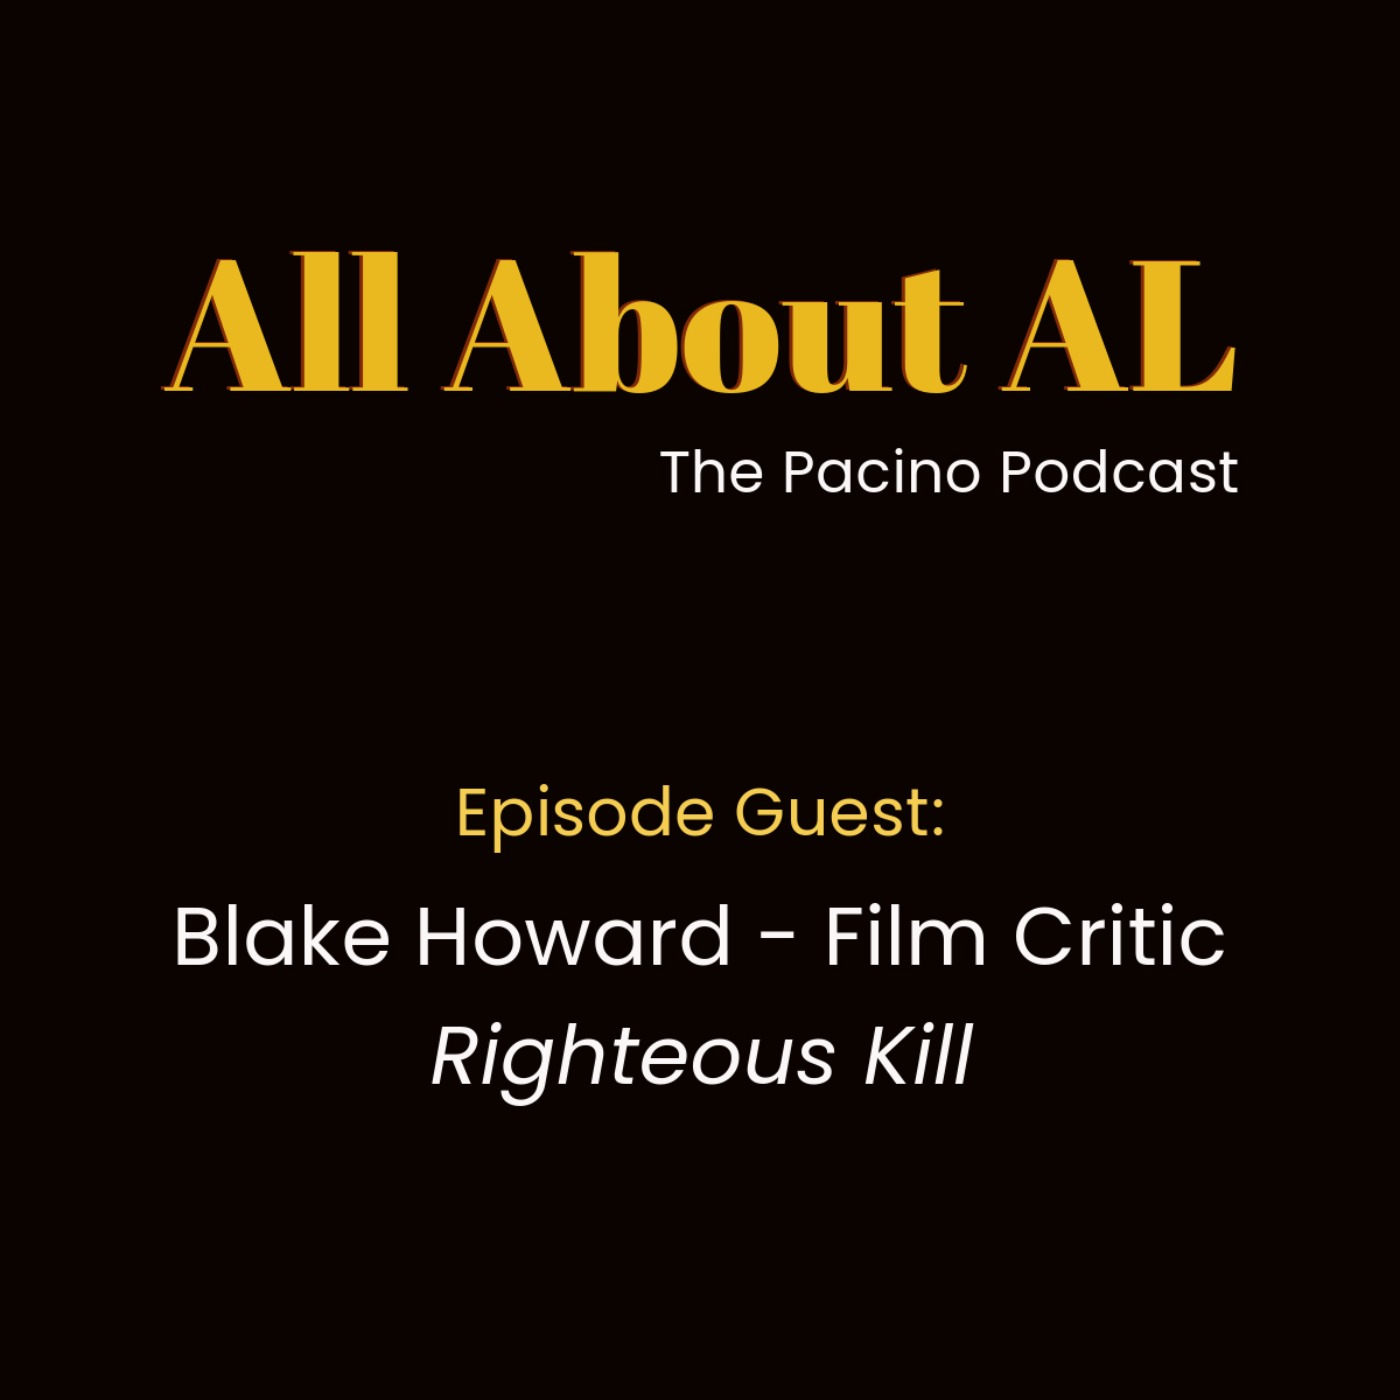 Episode 9: Righteous Kill with Blake Howard